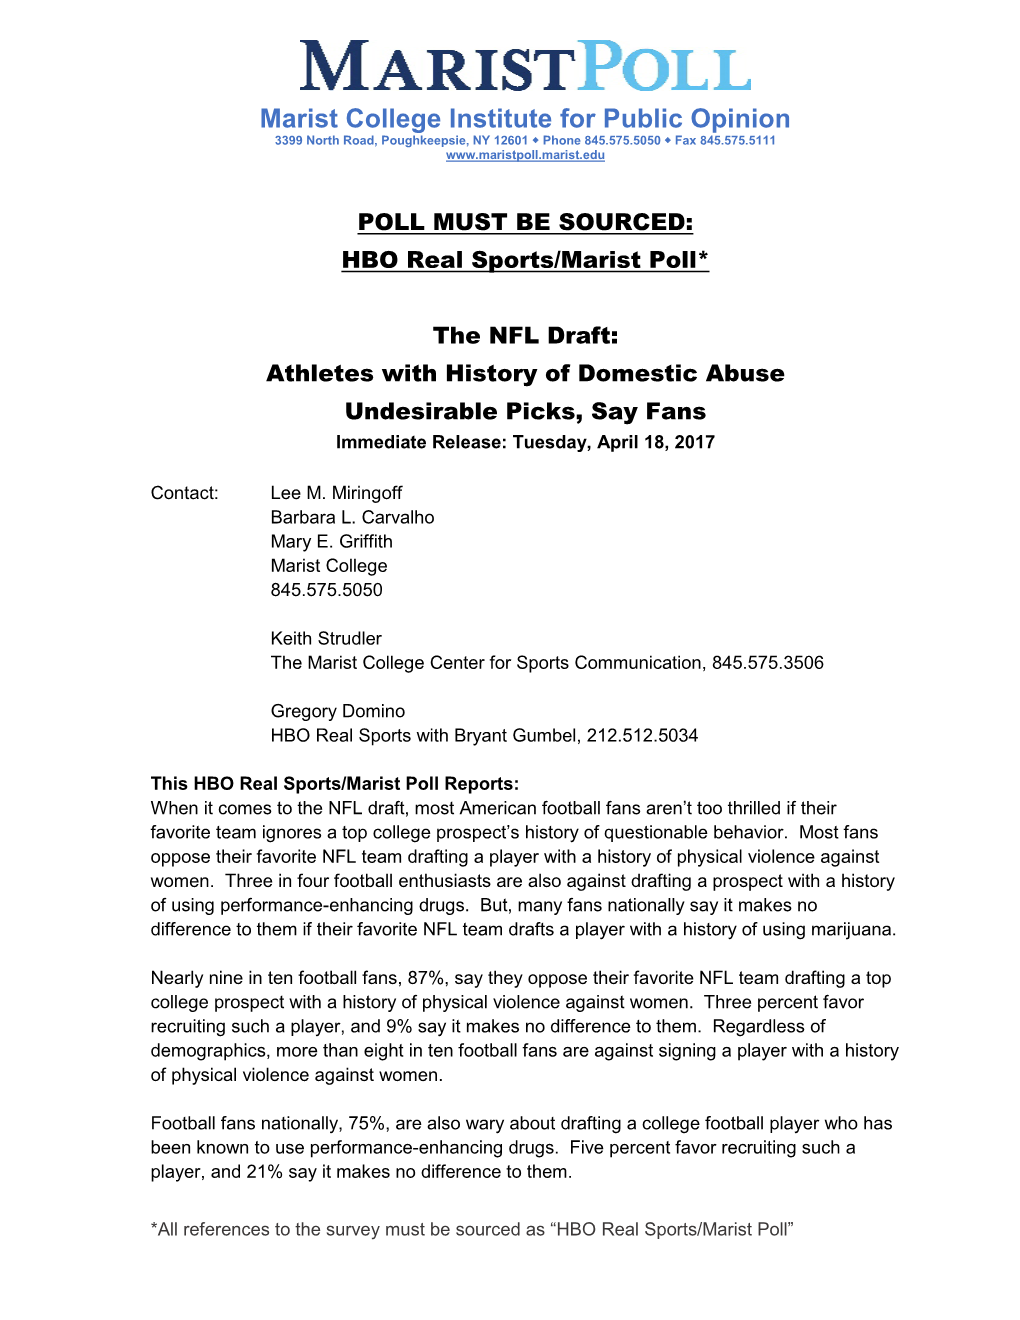 HBO Real Sports/Marist Poll* the NFL Draft: Athletes with History of Domestic Abuse Undesirable Picks, Say Fans